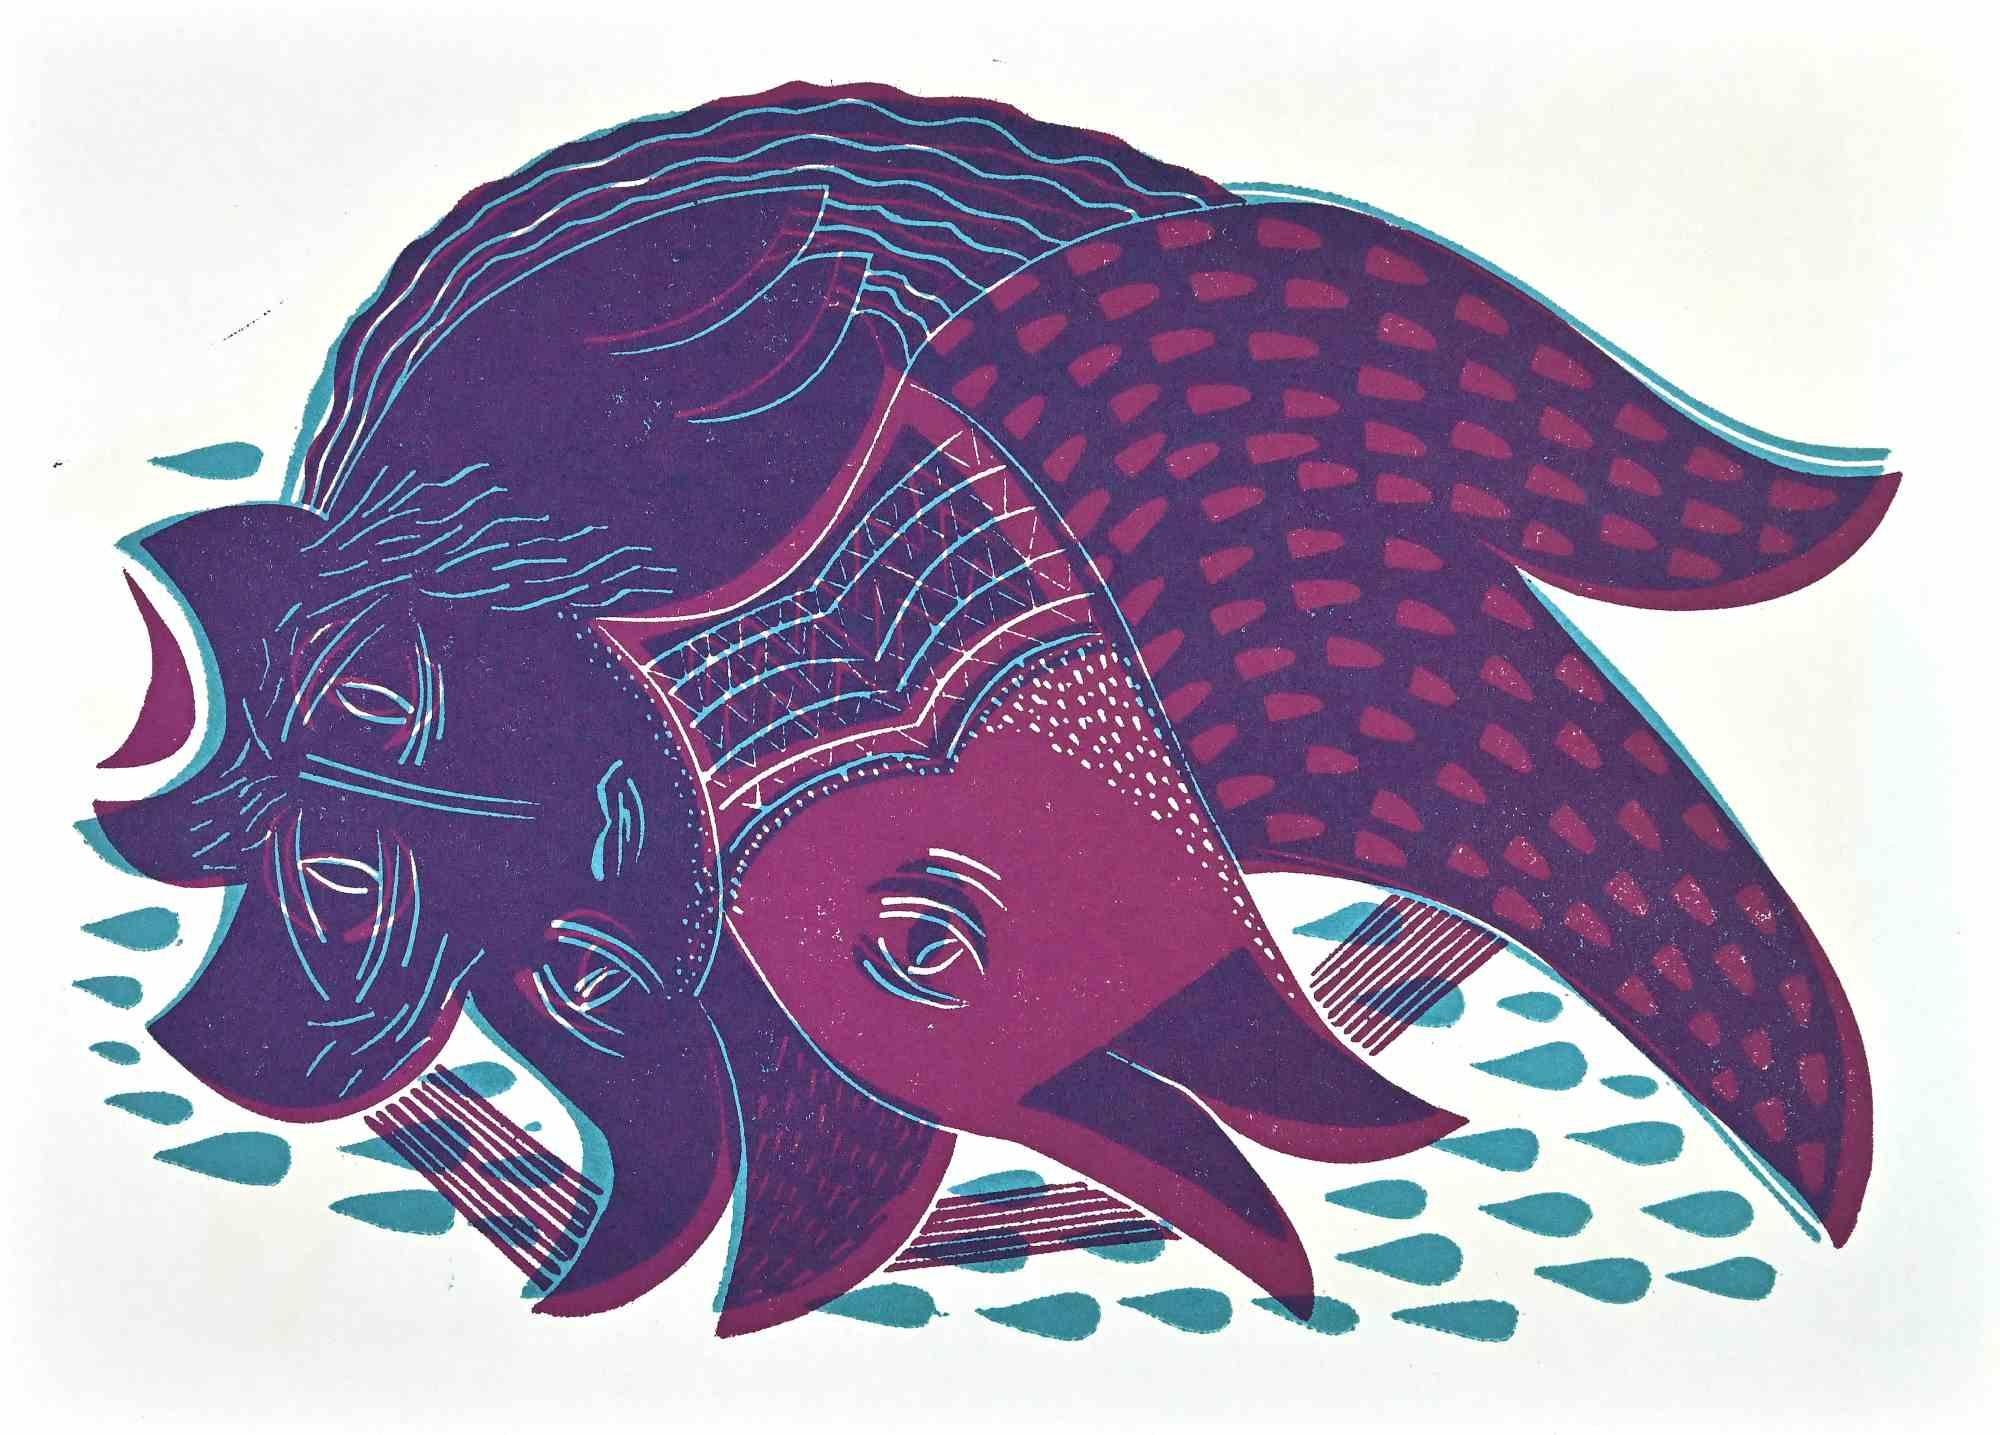 Creatures is a screen print realized by Axel Hartenstein in the mid-20th Century.

From the edition of 292 prints.

In good condition.

The artwork is depicted through vivid violet tone colors with soft strokes in a well-balanced composition,